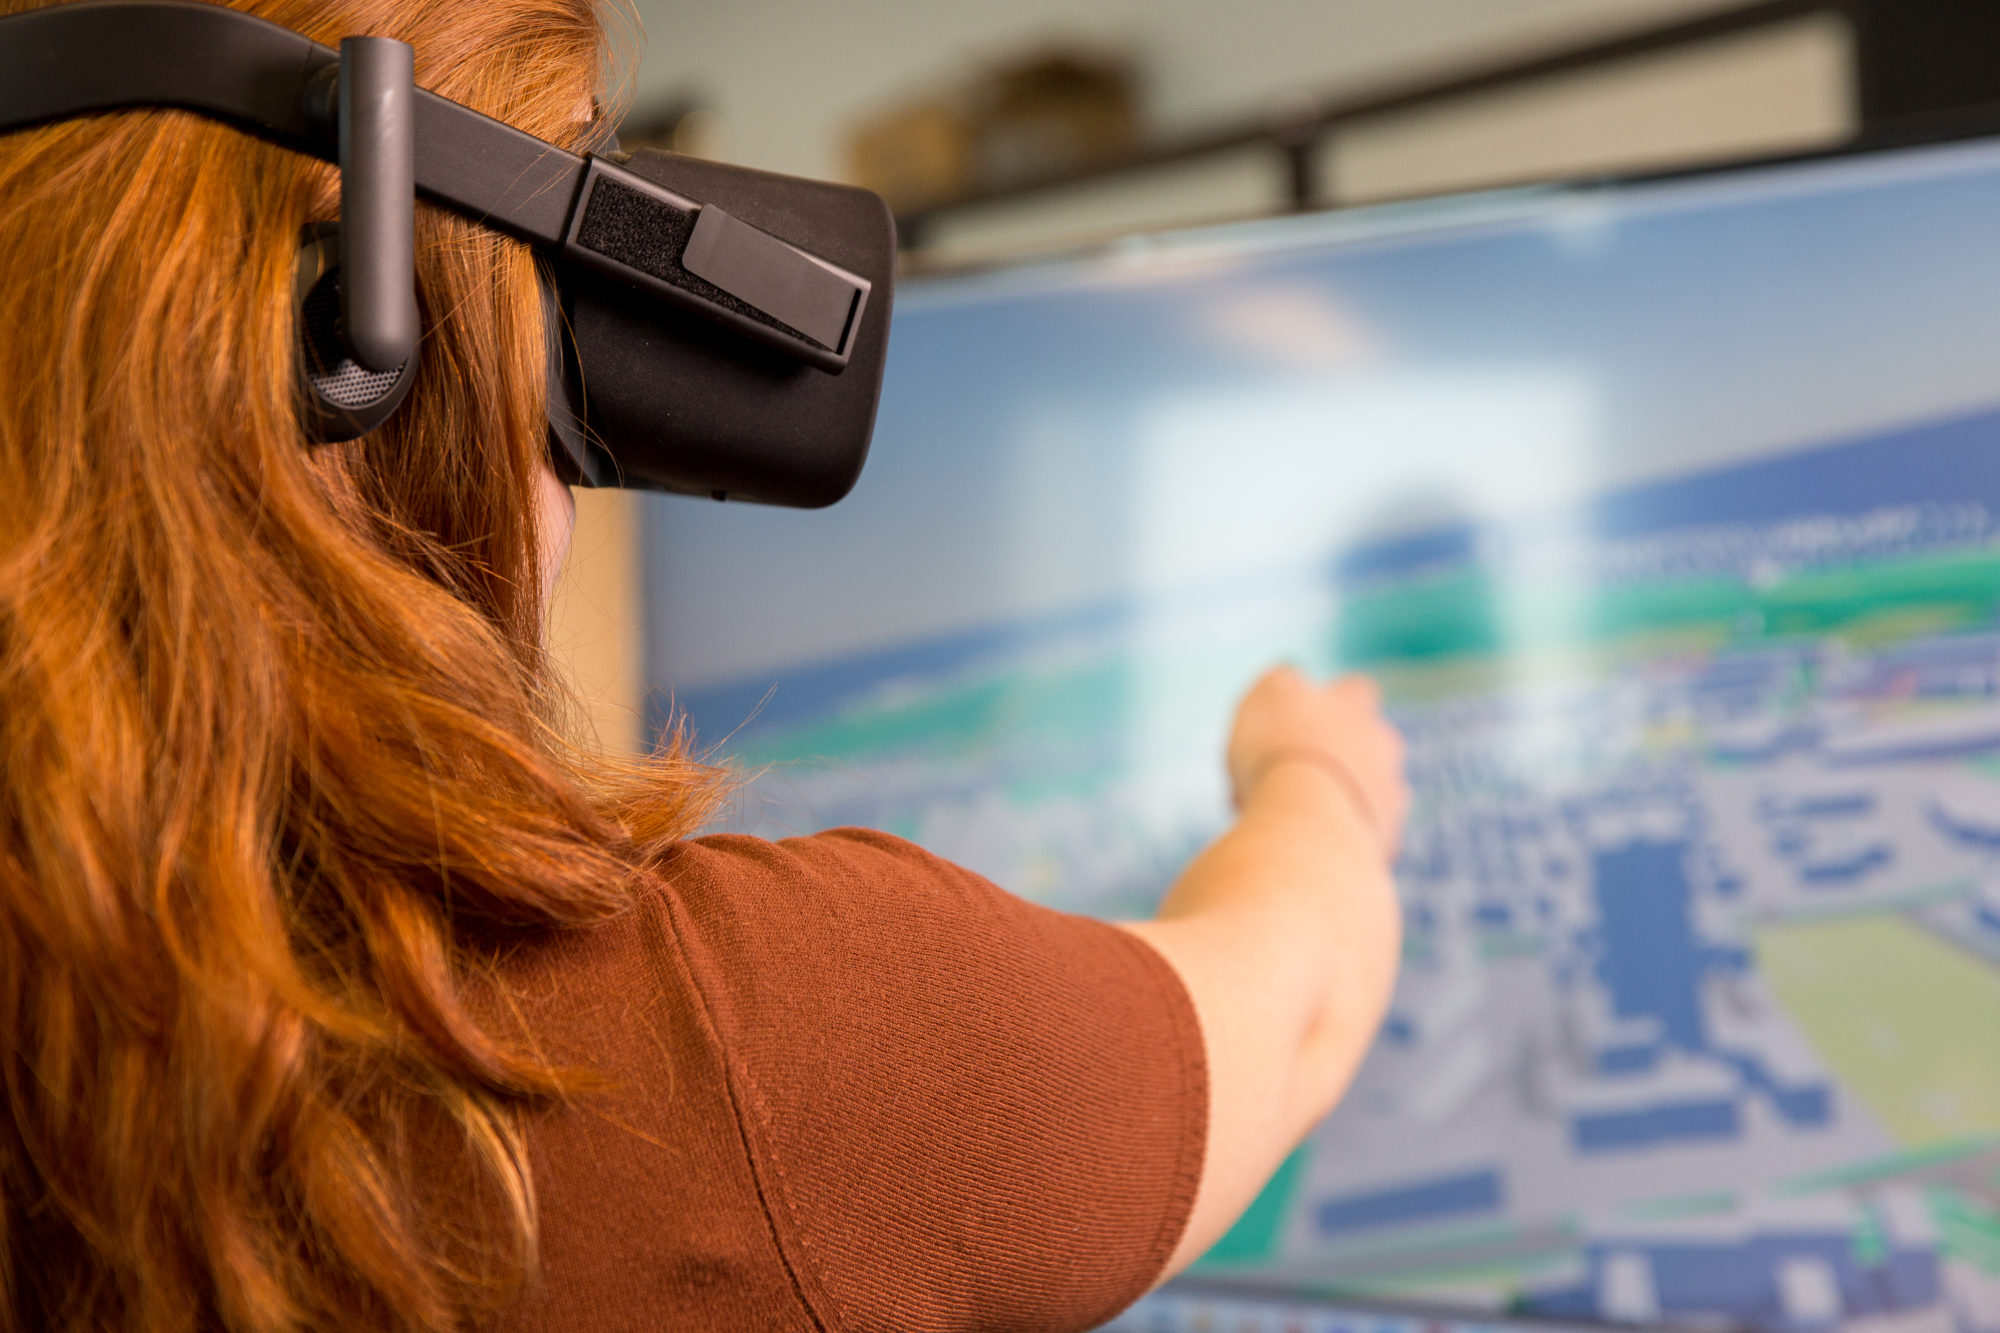 A female employee of Slingshot Simulations wearing a VR headset and pointing at a screen displaying 3D renders.